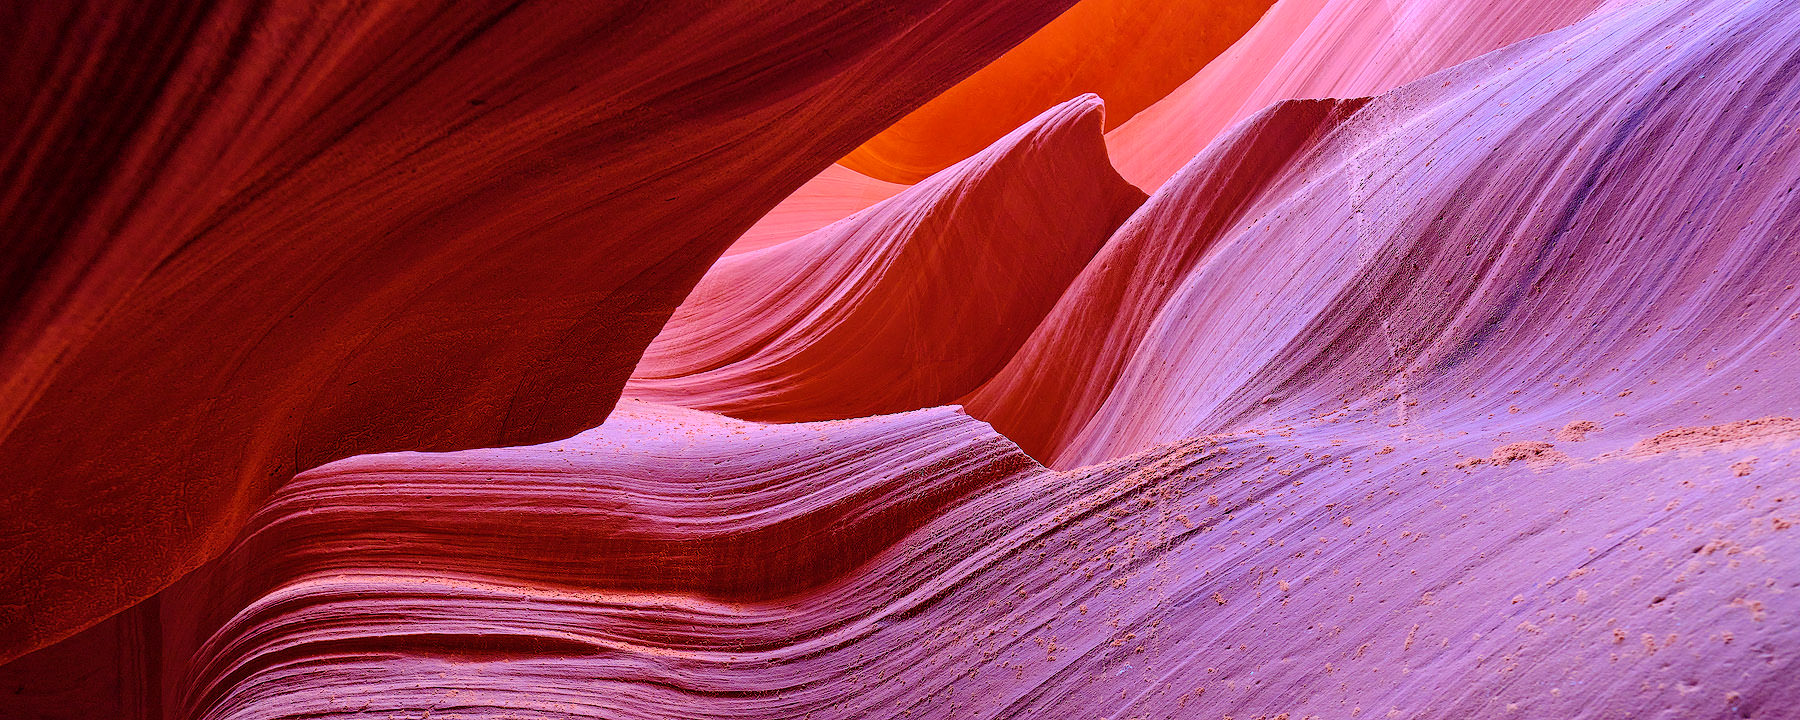 abstract panorama of sandstone canyon walls in lower antelope canyon near Page, Arizona in the American Southwest.  Nature Photography by Andrew Shoemaker